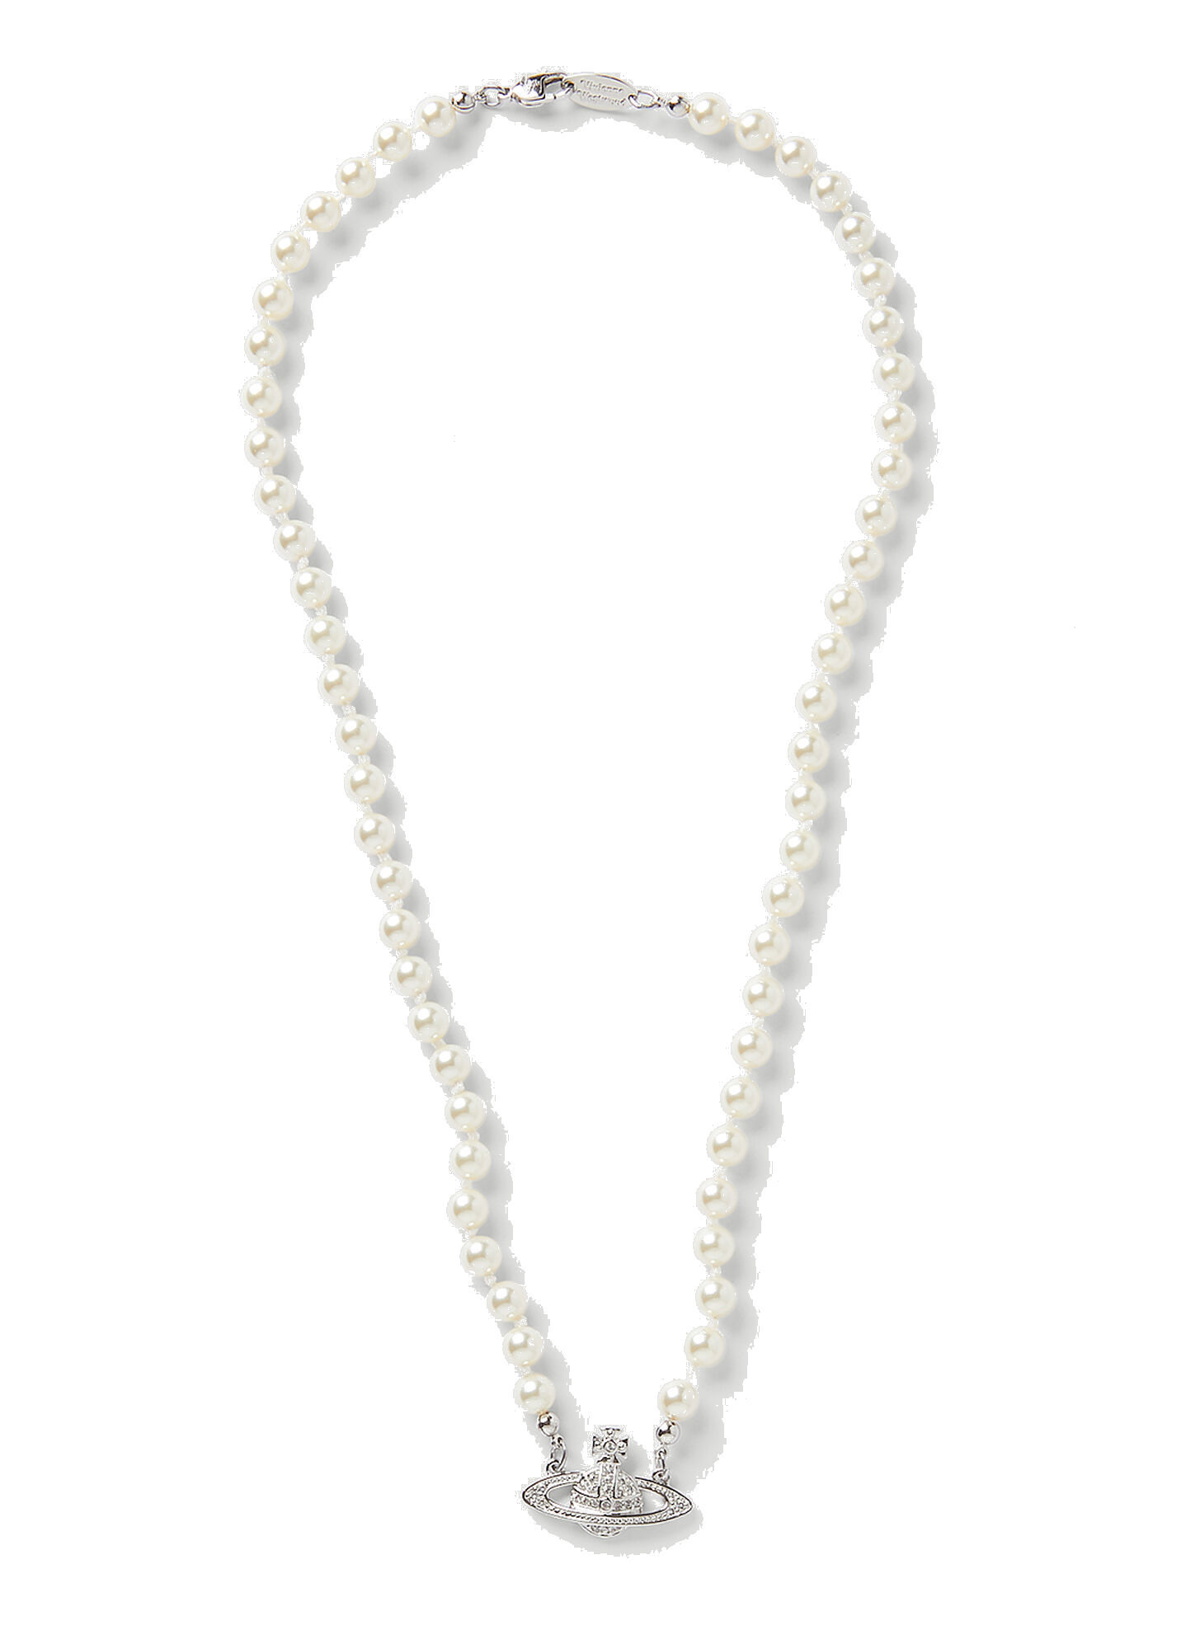 Mini Bas Relief Pearl Necklace in Silver Vivienne Westwood